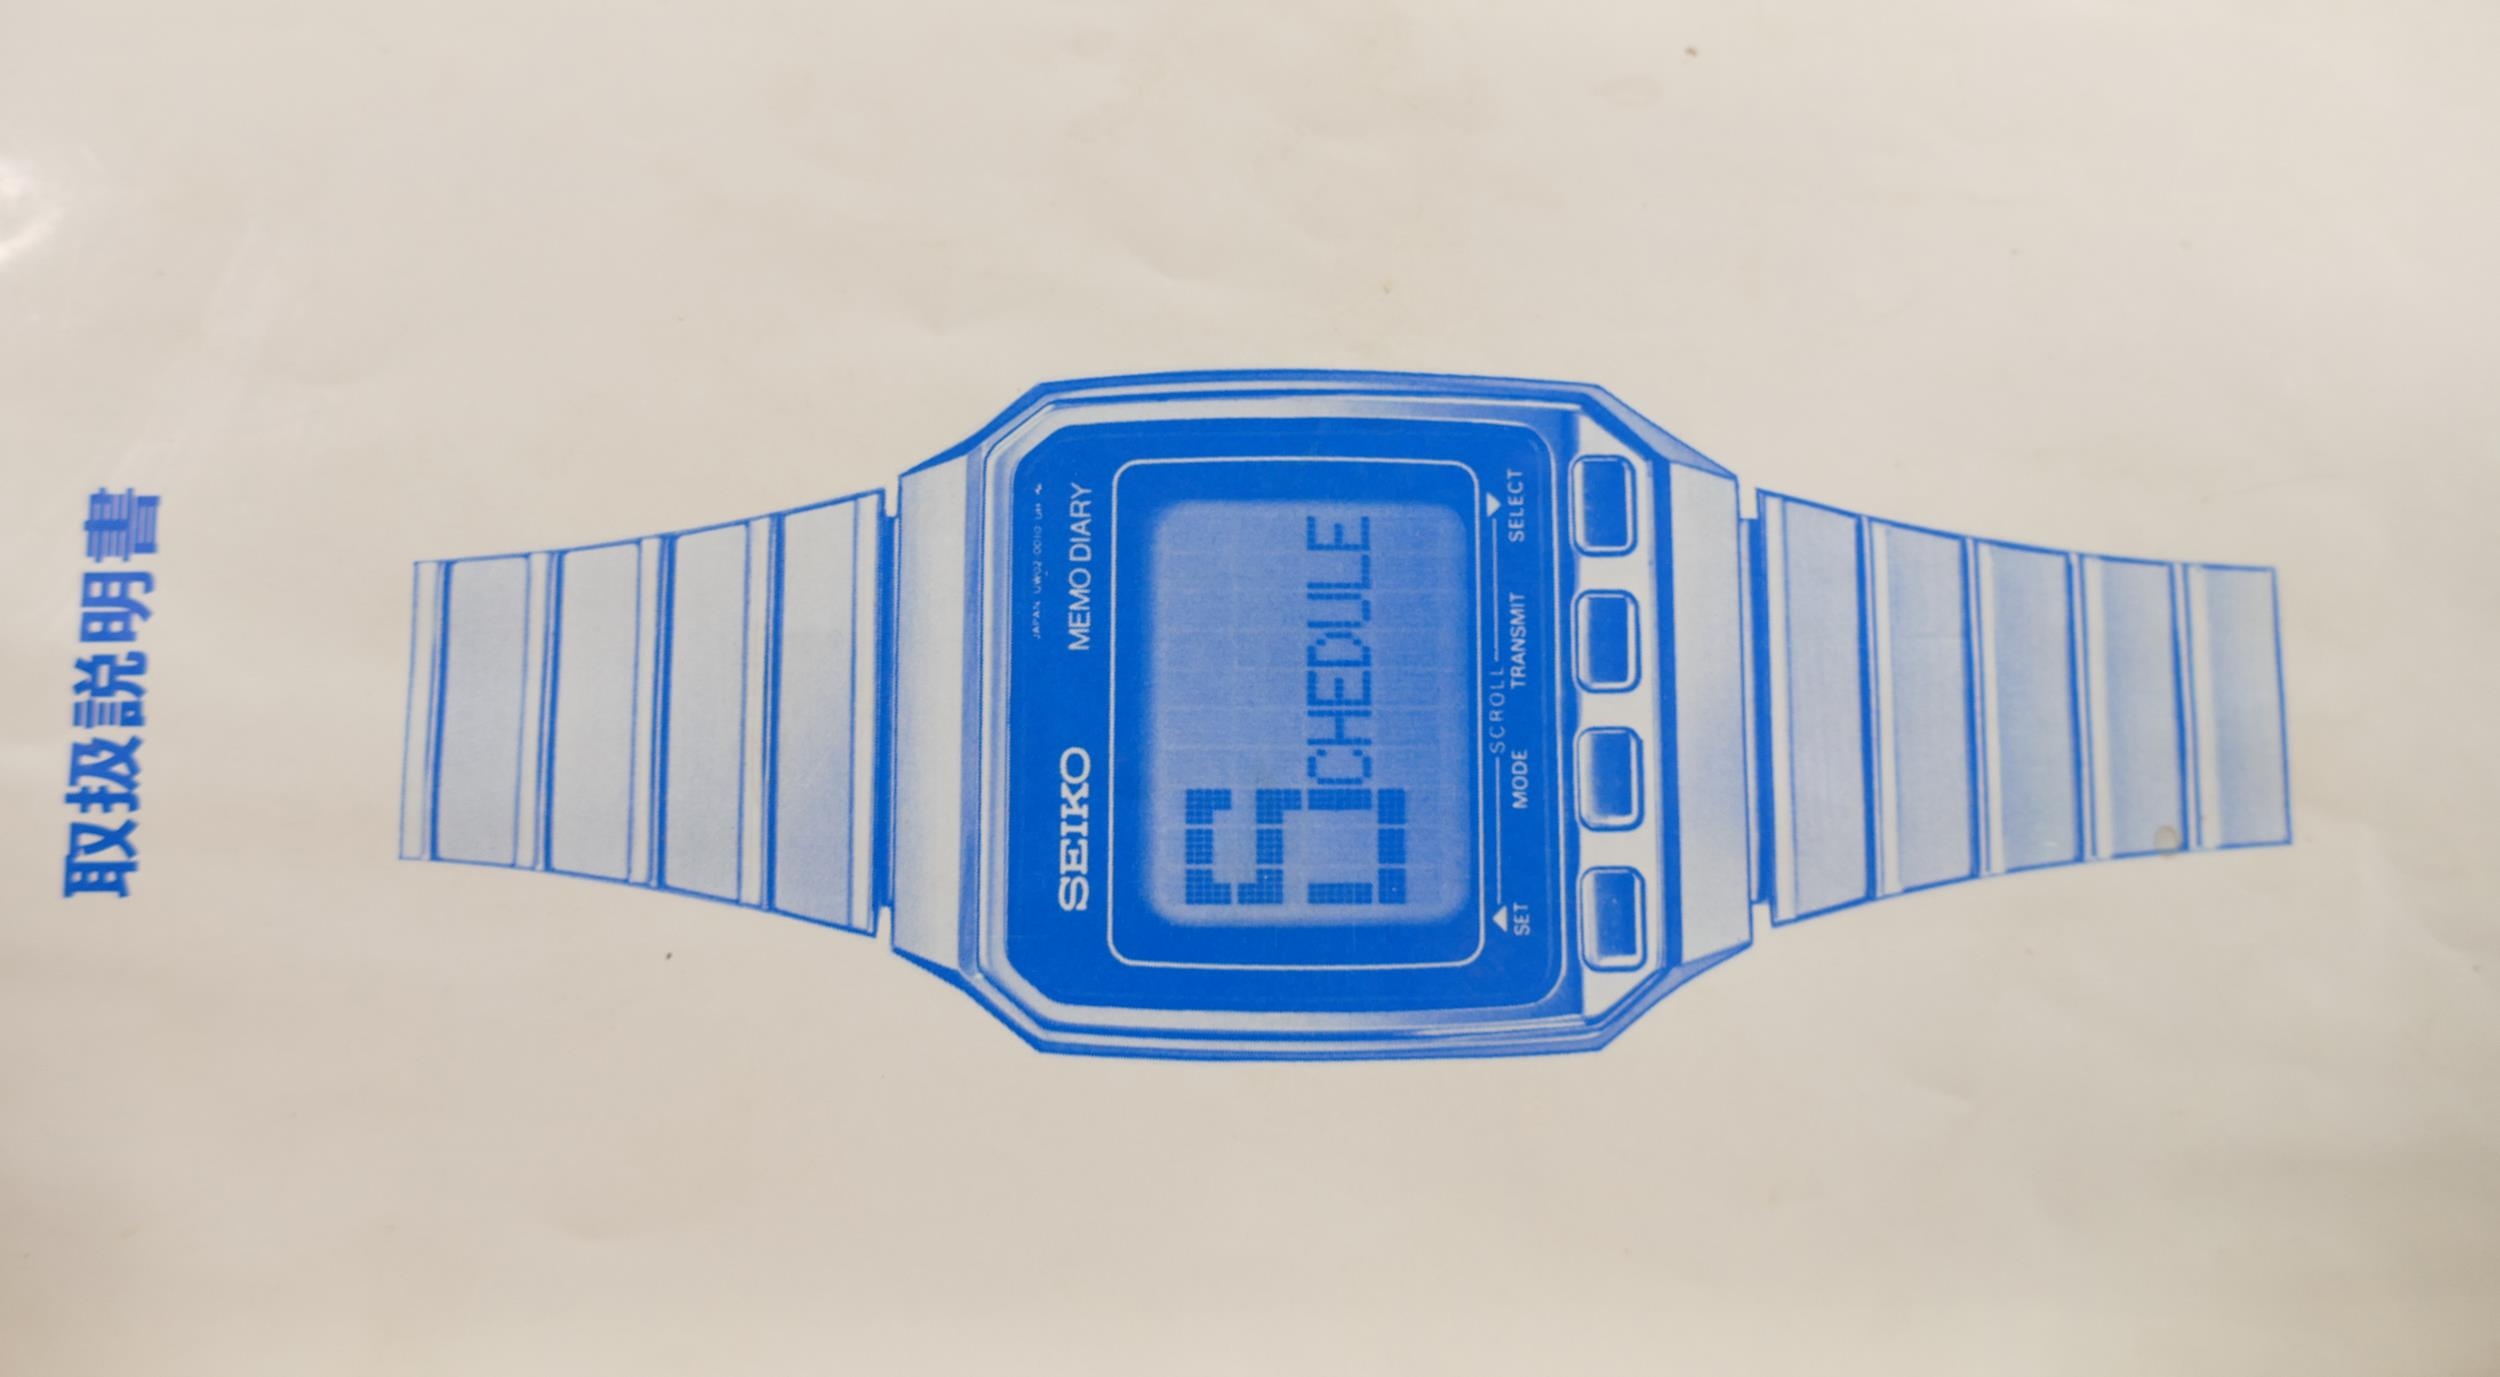 Boxed with instructions Seiko Memo Diary Retro Watch with Diary pad: sorry no battery to test but - Image 2 of 4